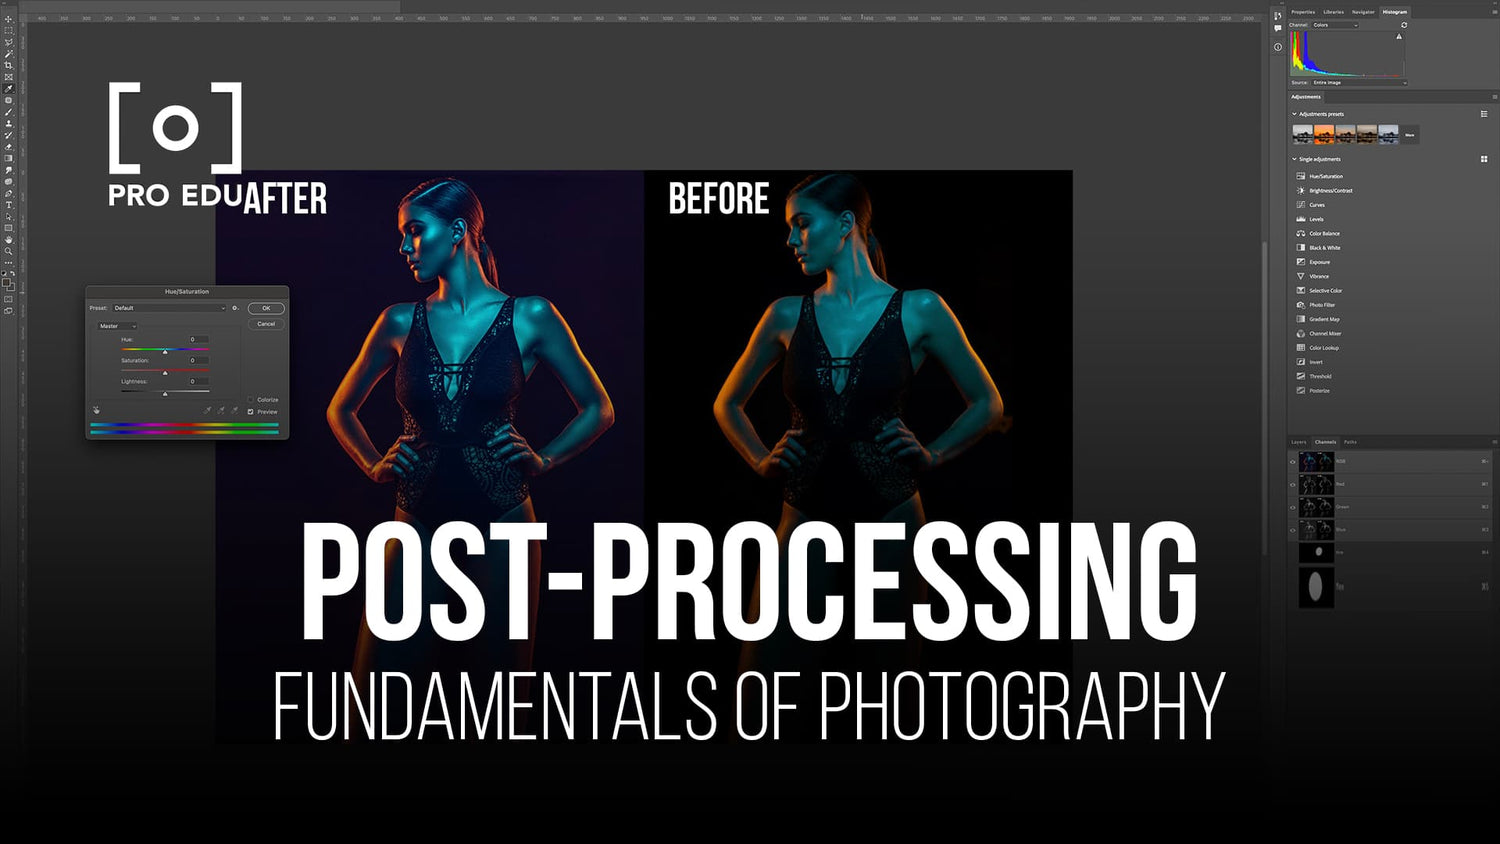 A beginner's guide to understanding post-processing in photography